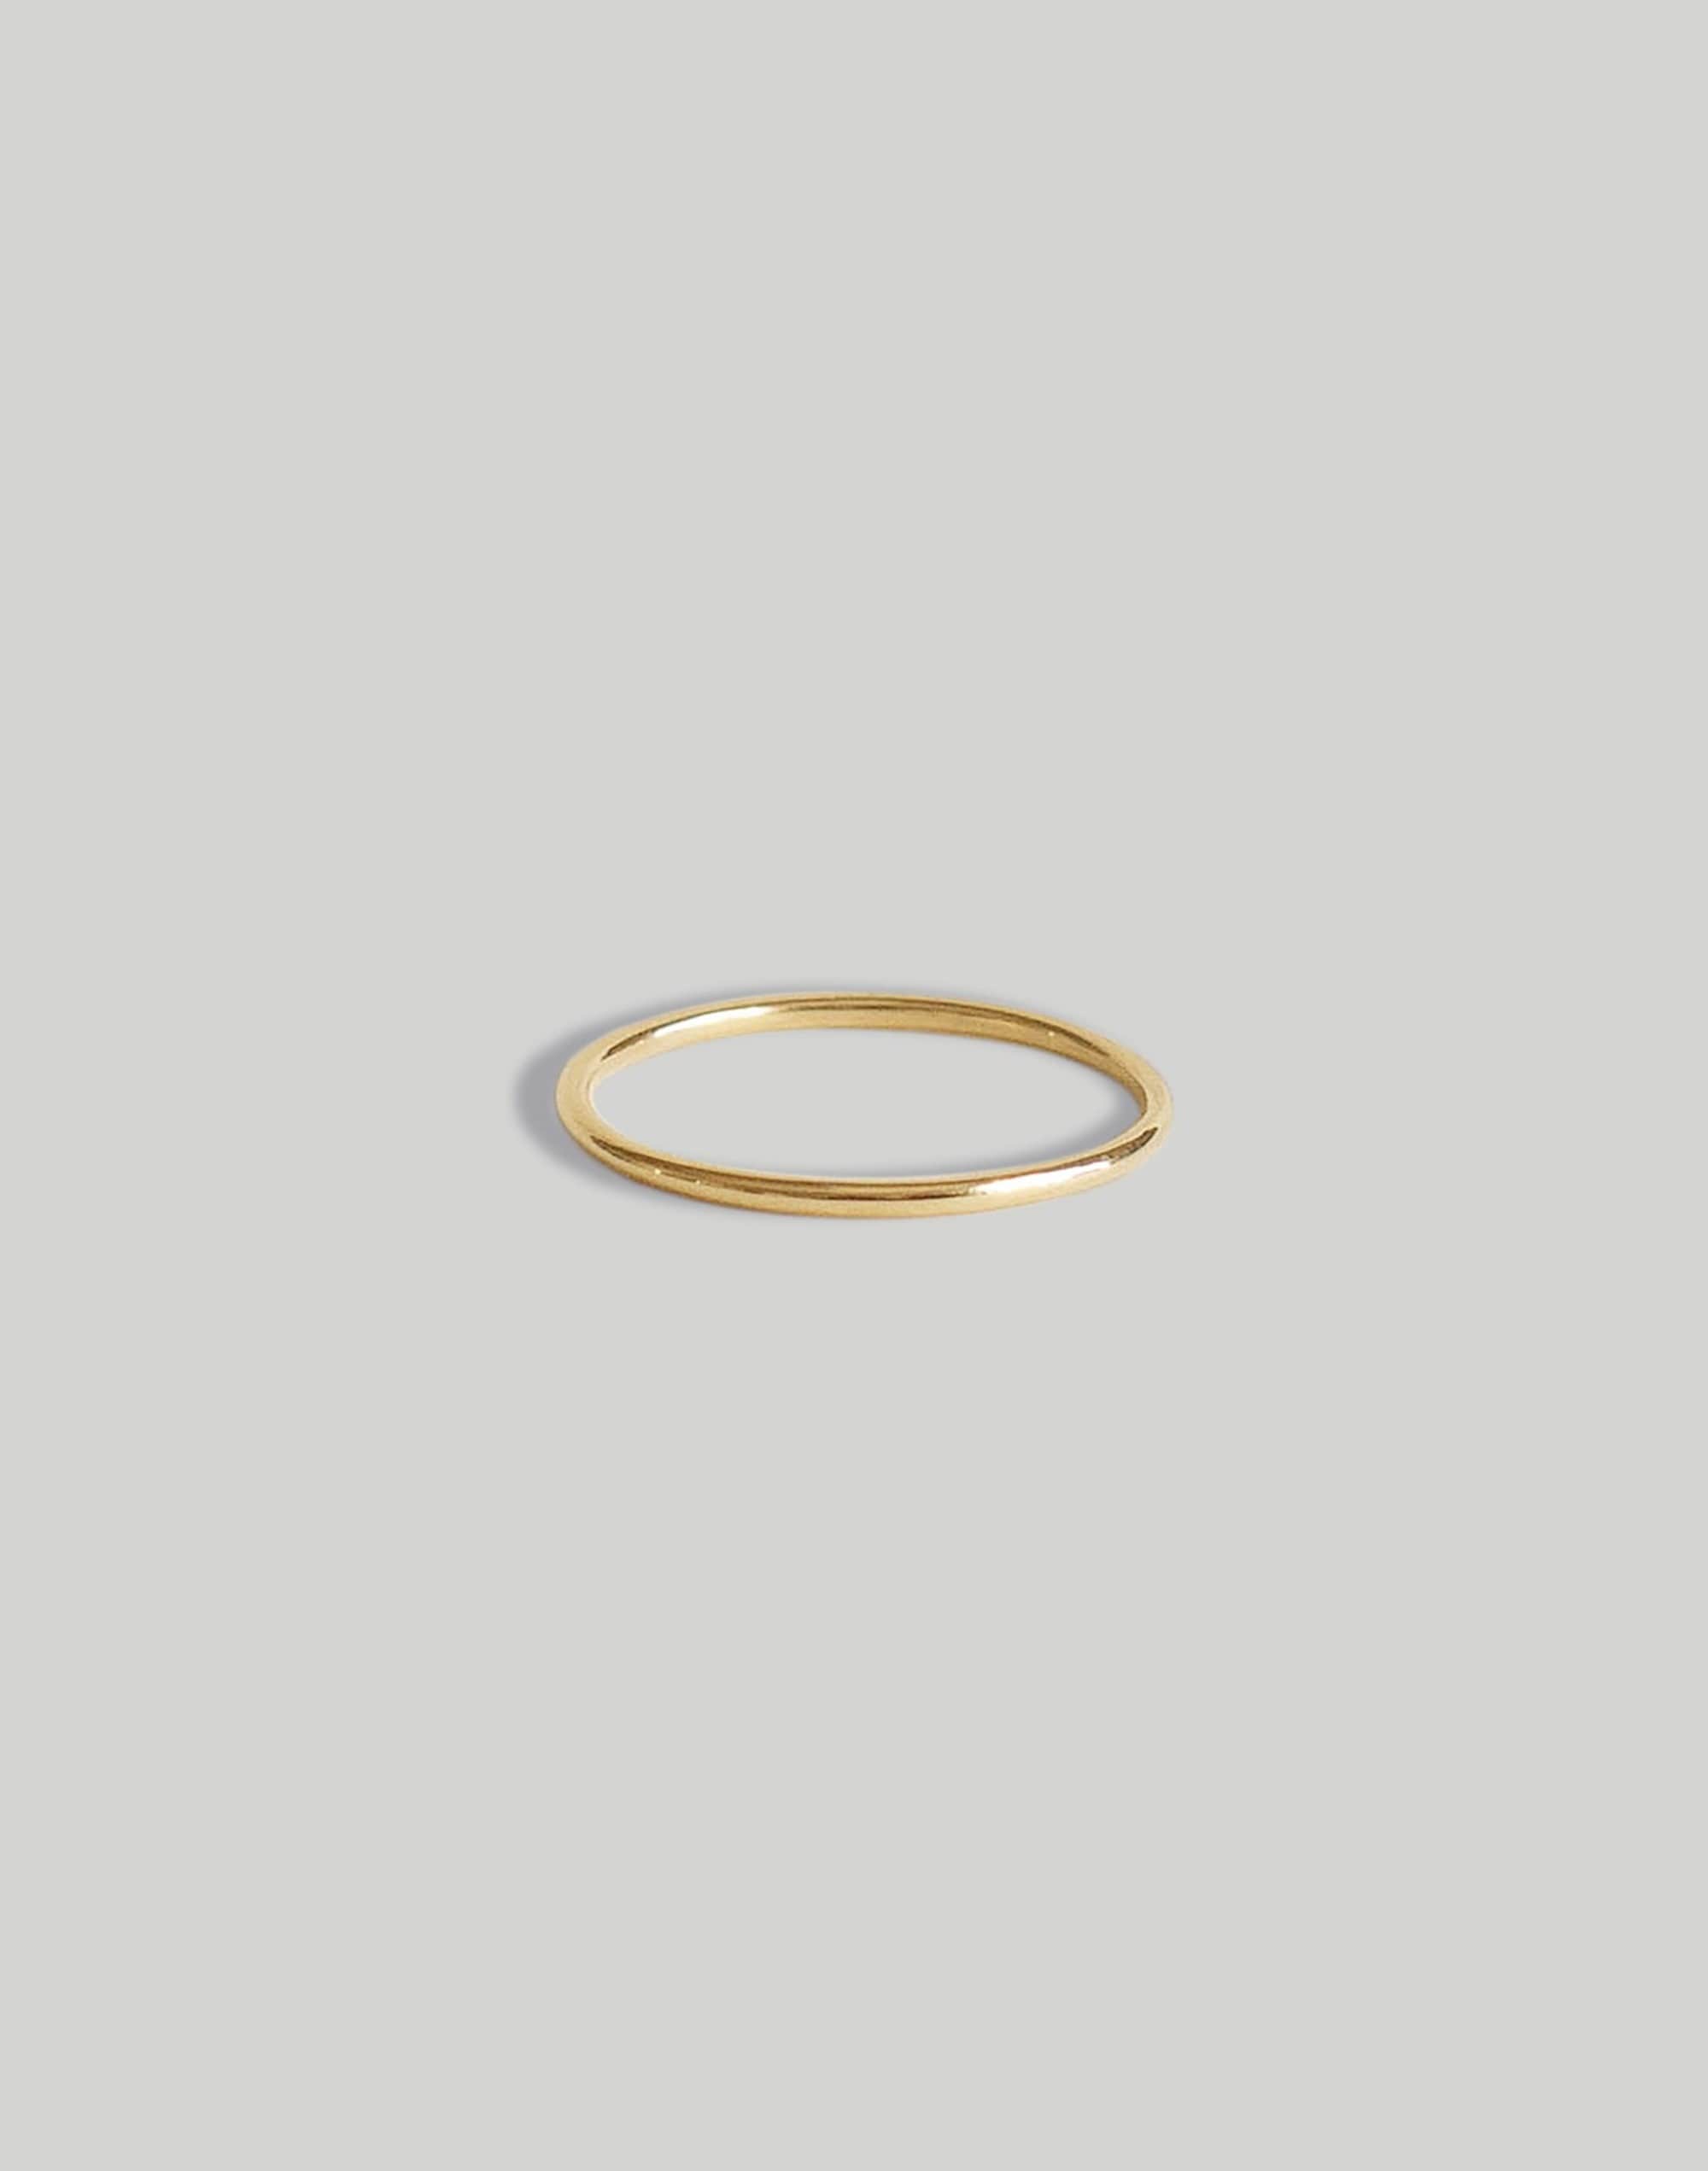 Kinn Studio™ Barely There Stacking Ring